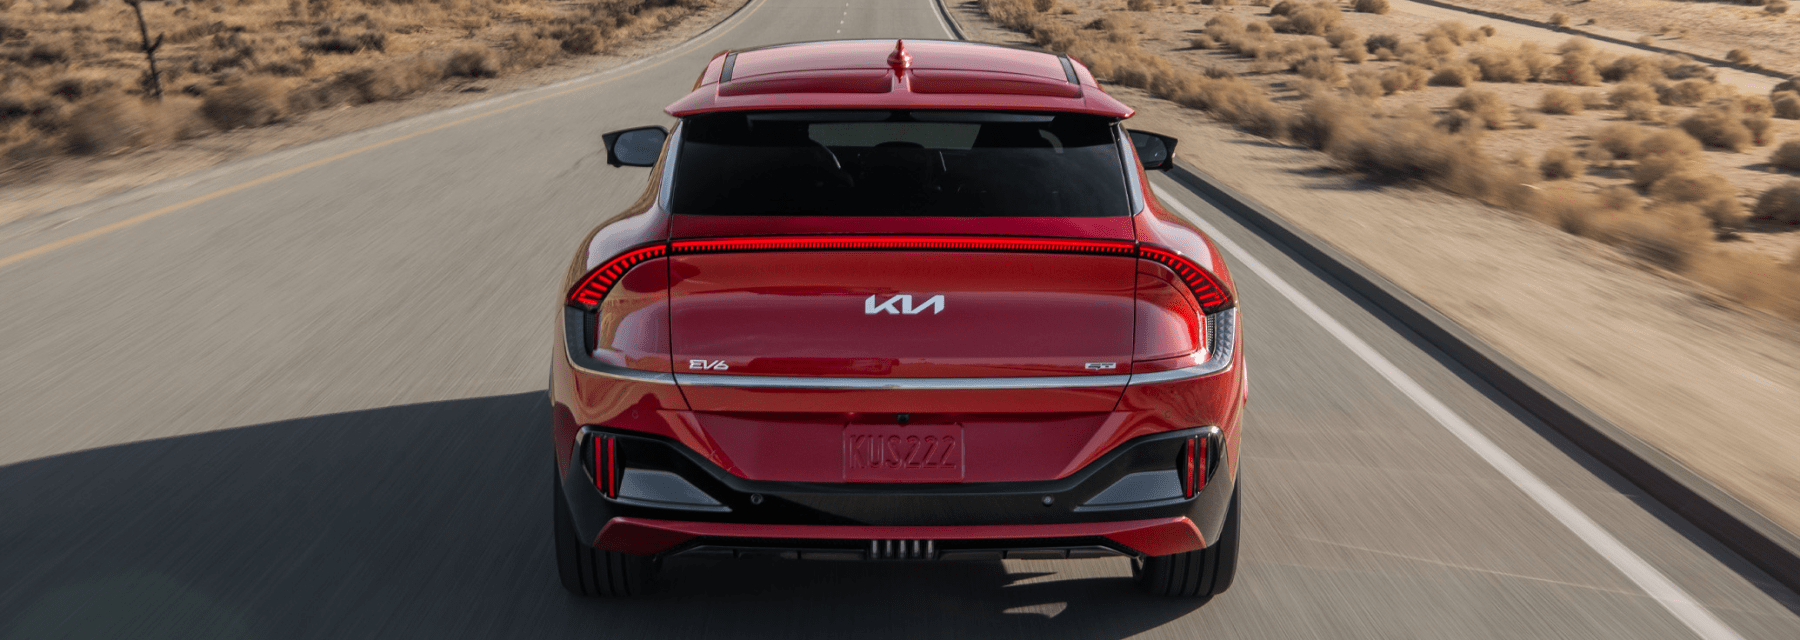 Rear view of a Red Kia